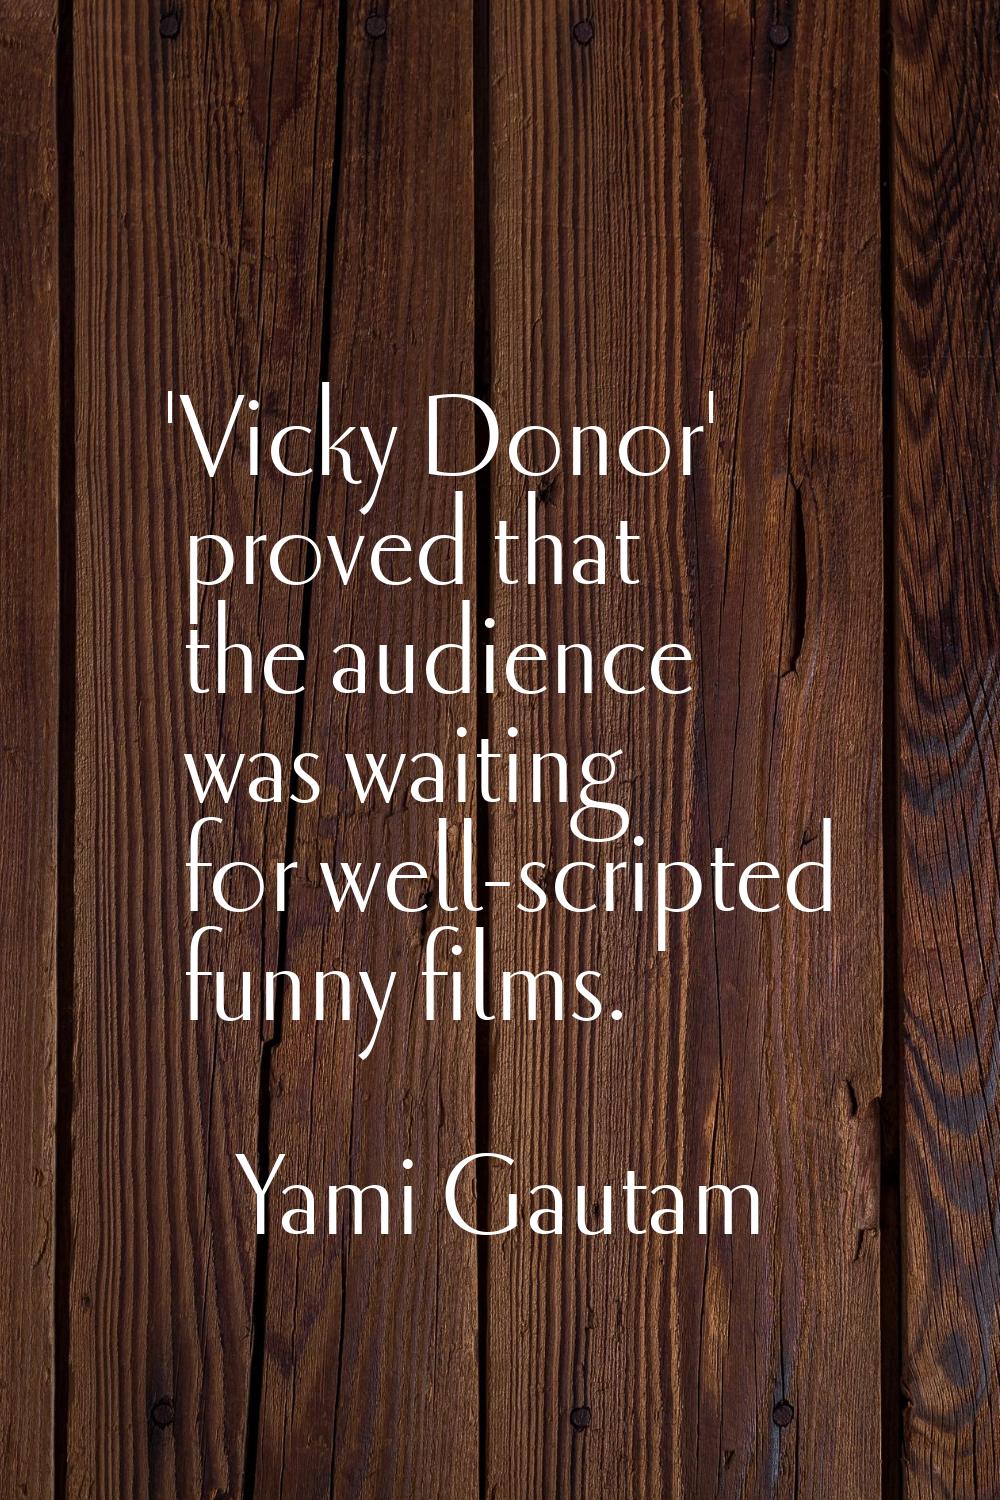 'Vicky Donor' proved that the audience was waiting for well-scripted funny films.